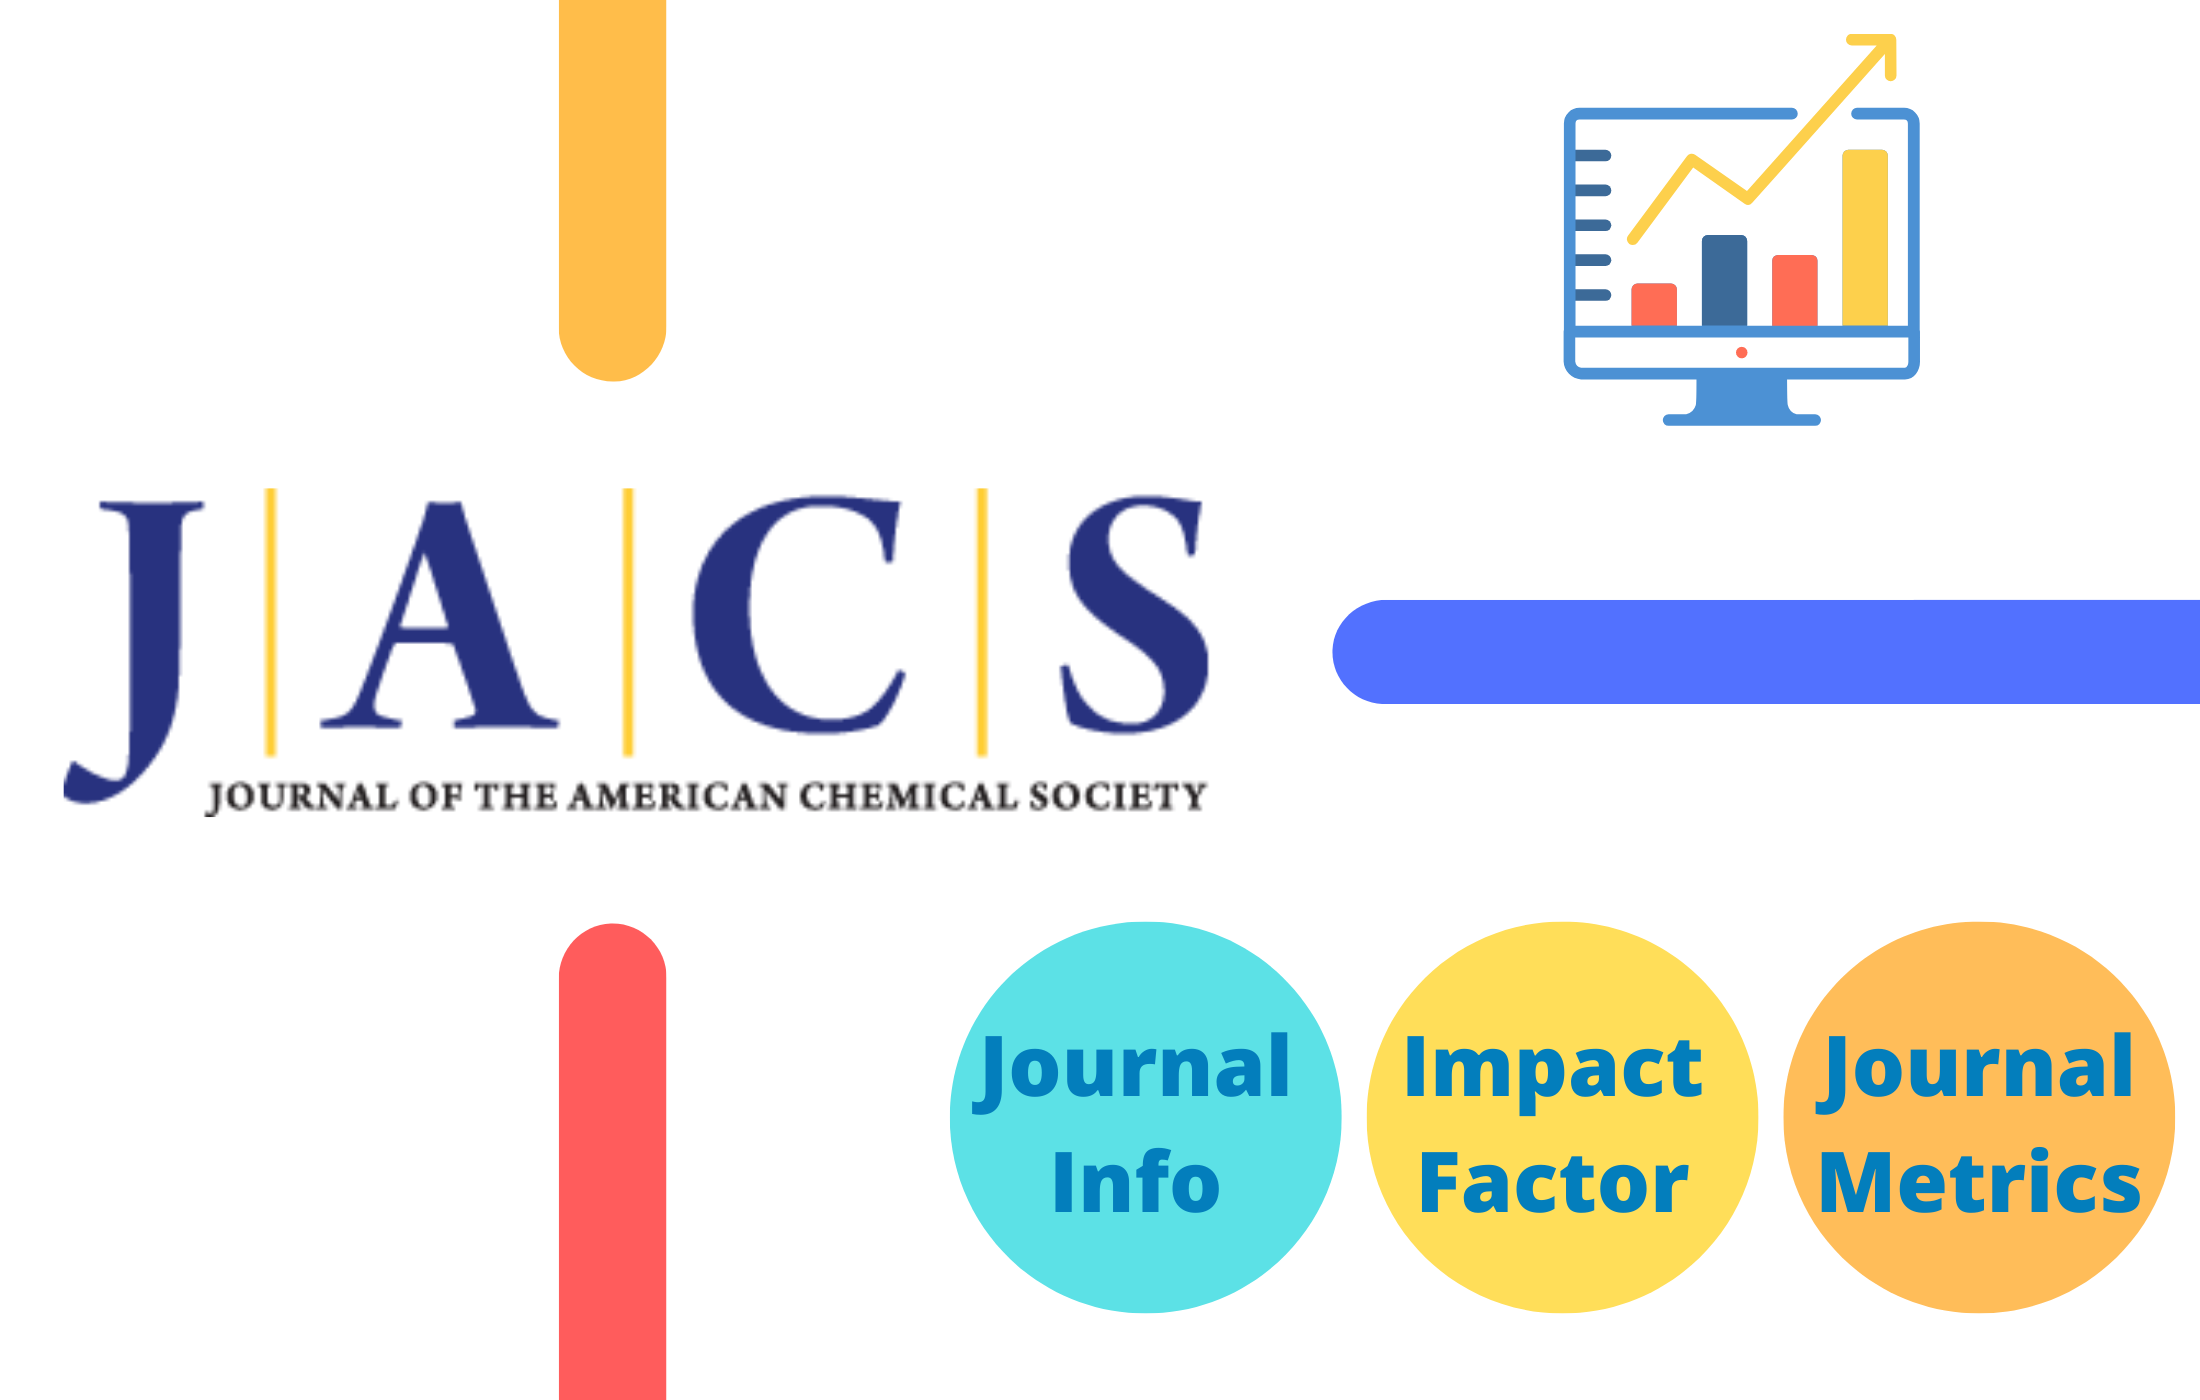 Chemical society. Journal of the American Chemical Society. Impact Factor of Journal. Импакт-фактор. Impact Factor icon.